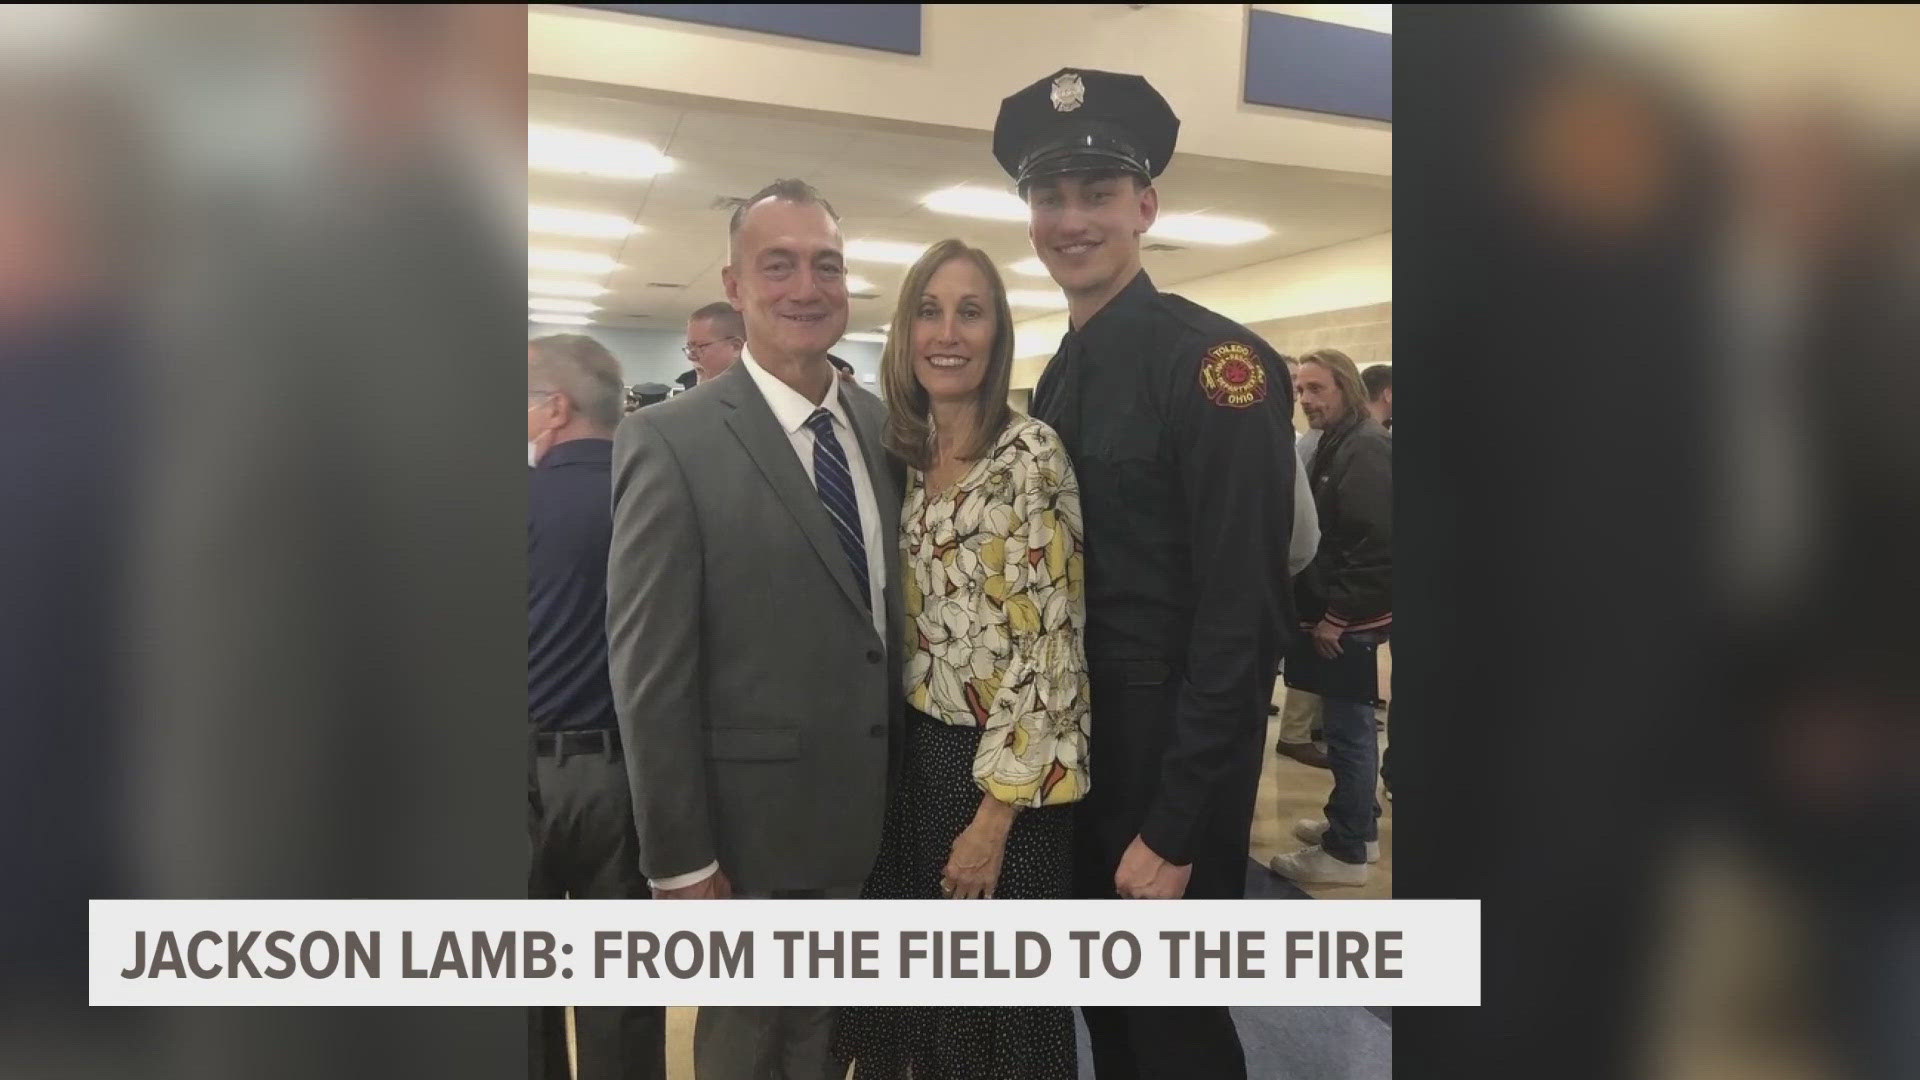 Jackson Lamb took his baseball talents to the University of Michigan hoping to play pro. But as fate would have it, he now serves in the Toledo Fire Department.